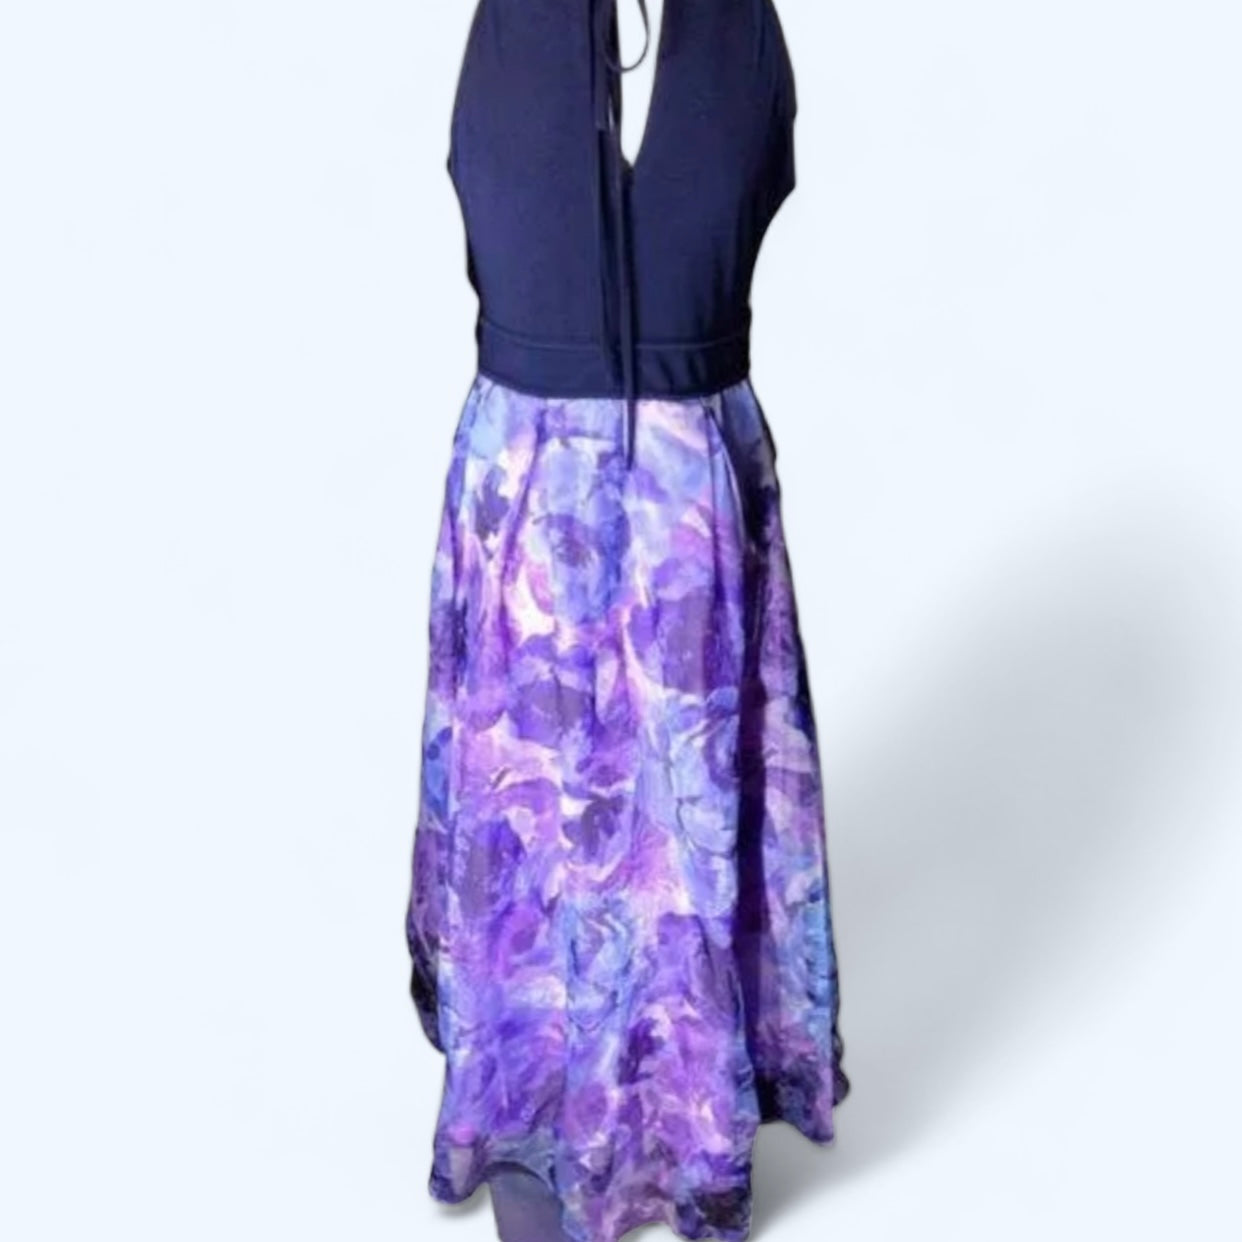 Slny NWT Floral Maxi Dress by Betsy & Adam | Brands Overstock